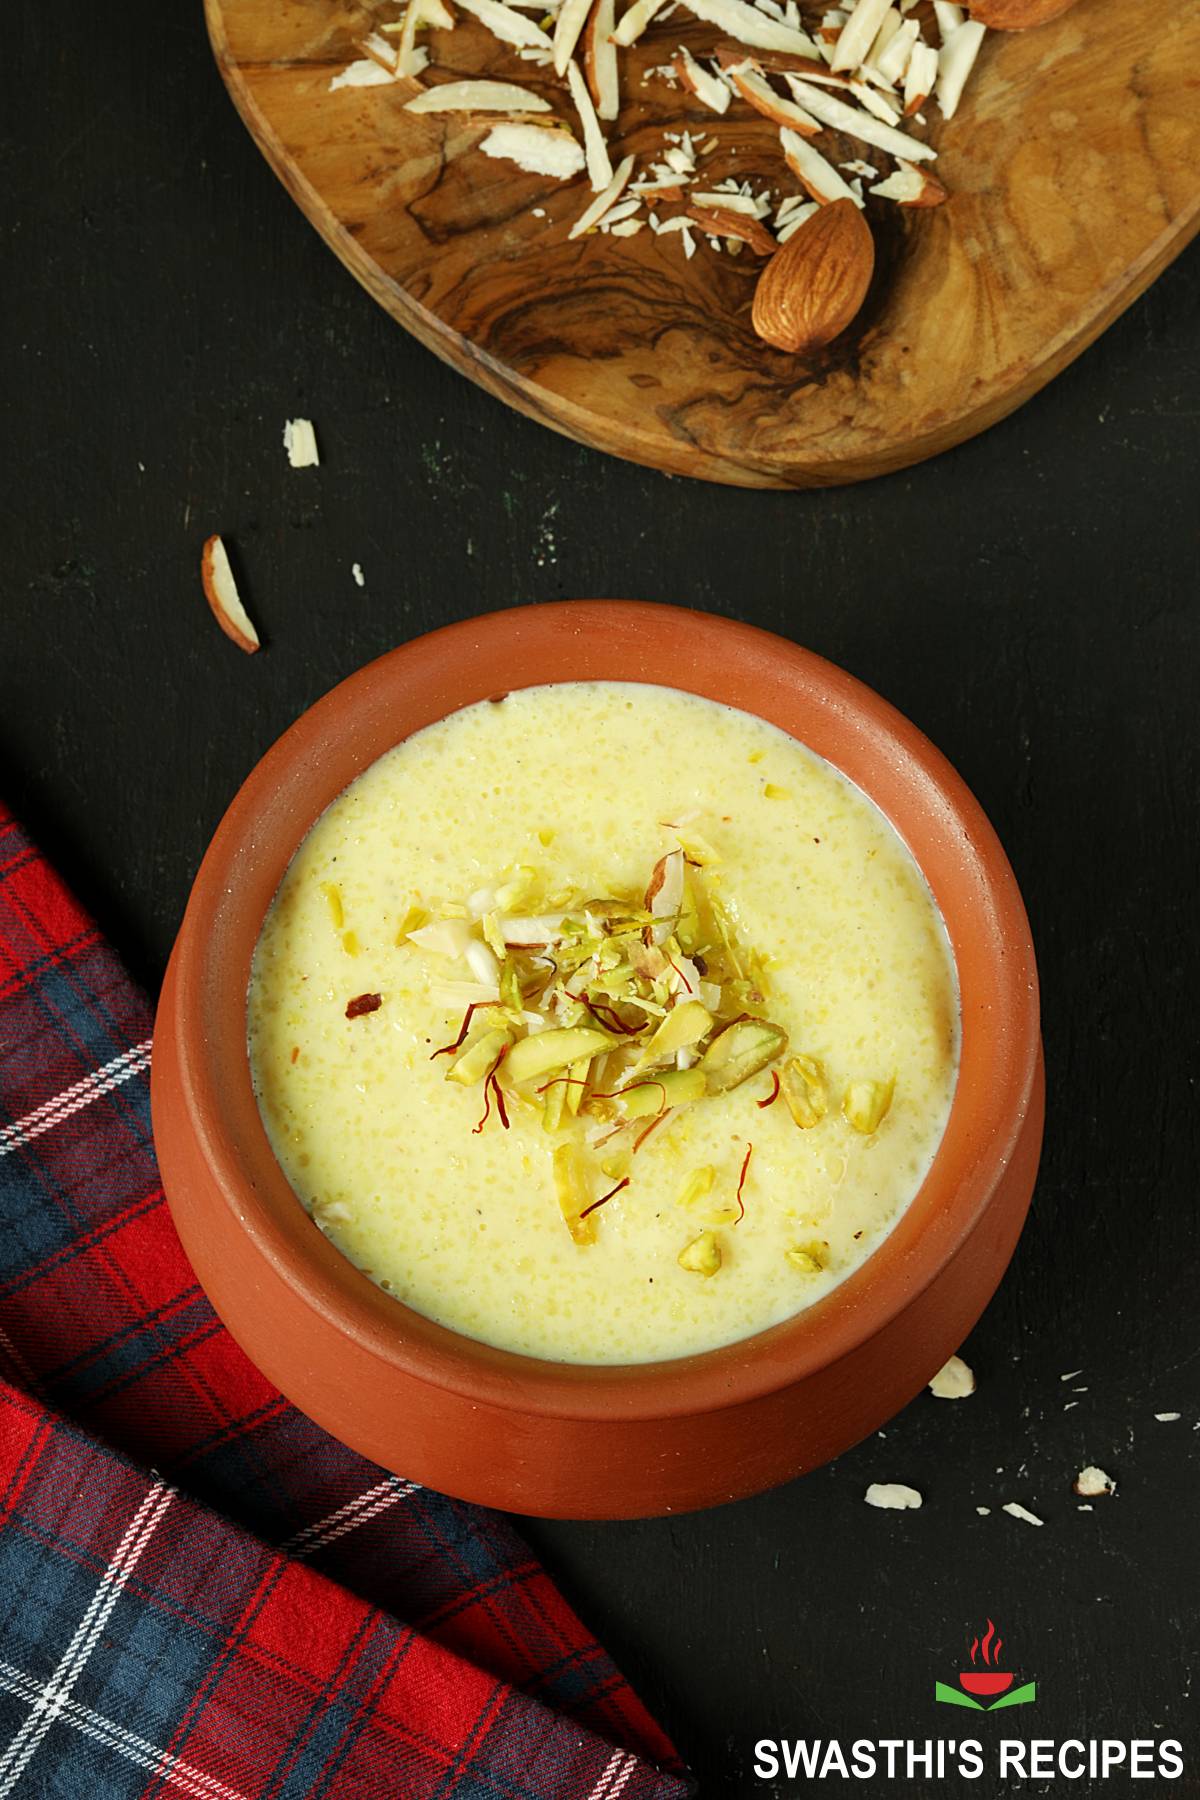 Phirni also known as firni served in a clay pot